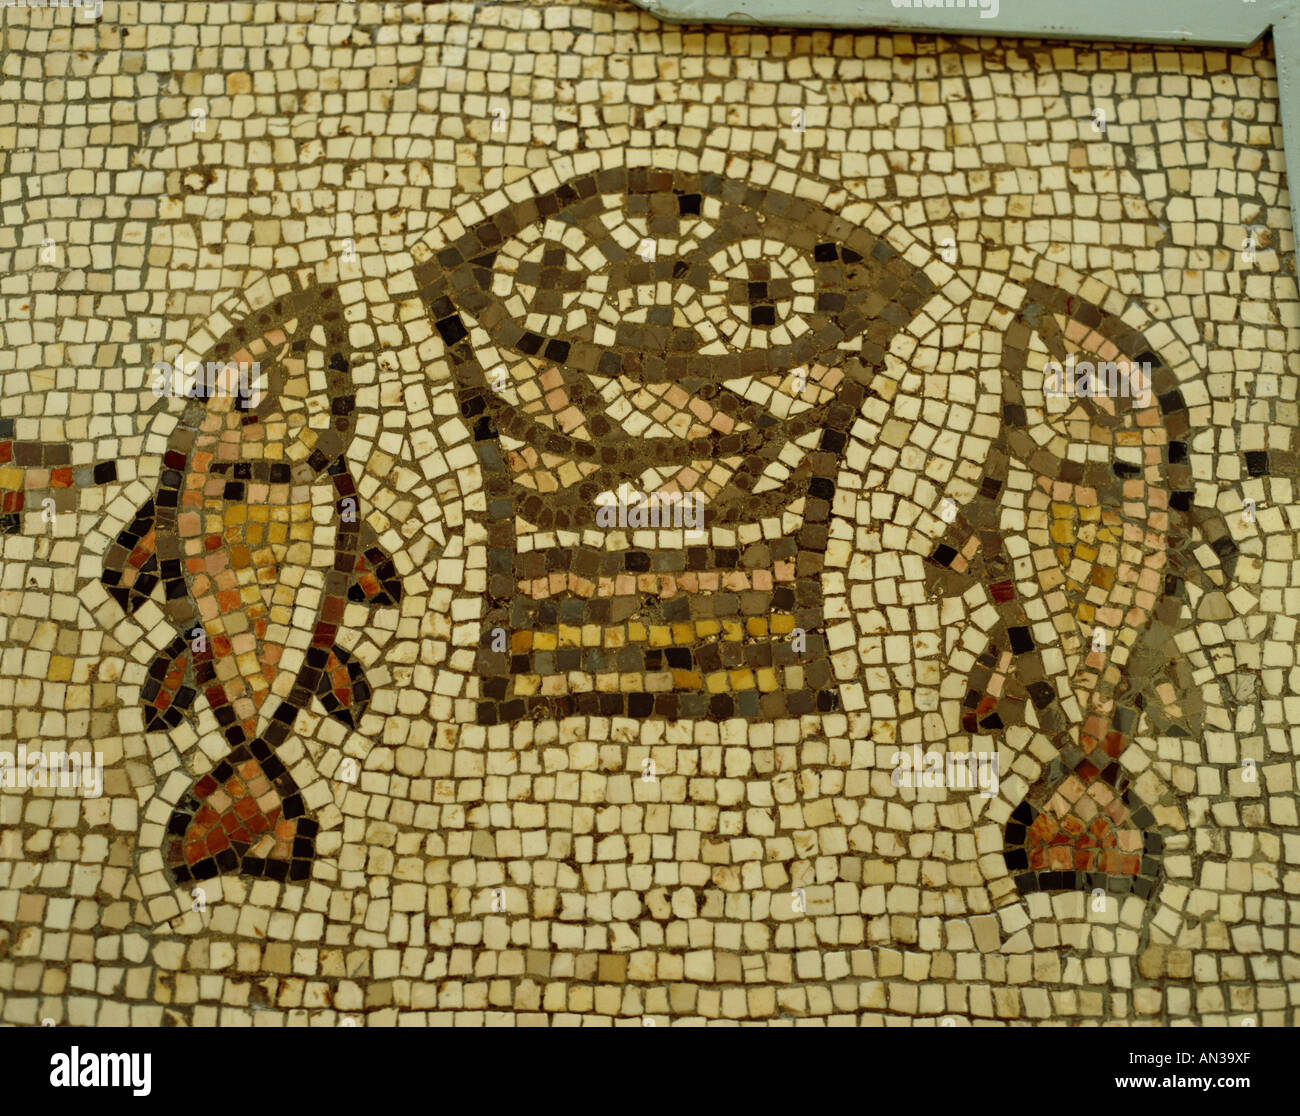 Church of the Multiplication / Mosaic of the Loaves and the Fishes, Tabkha, Galilee, Israel Stock Photo